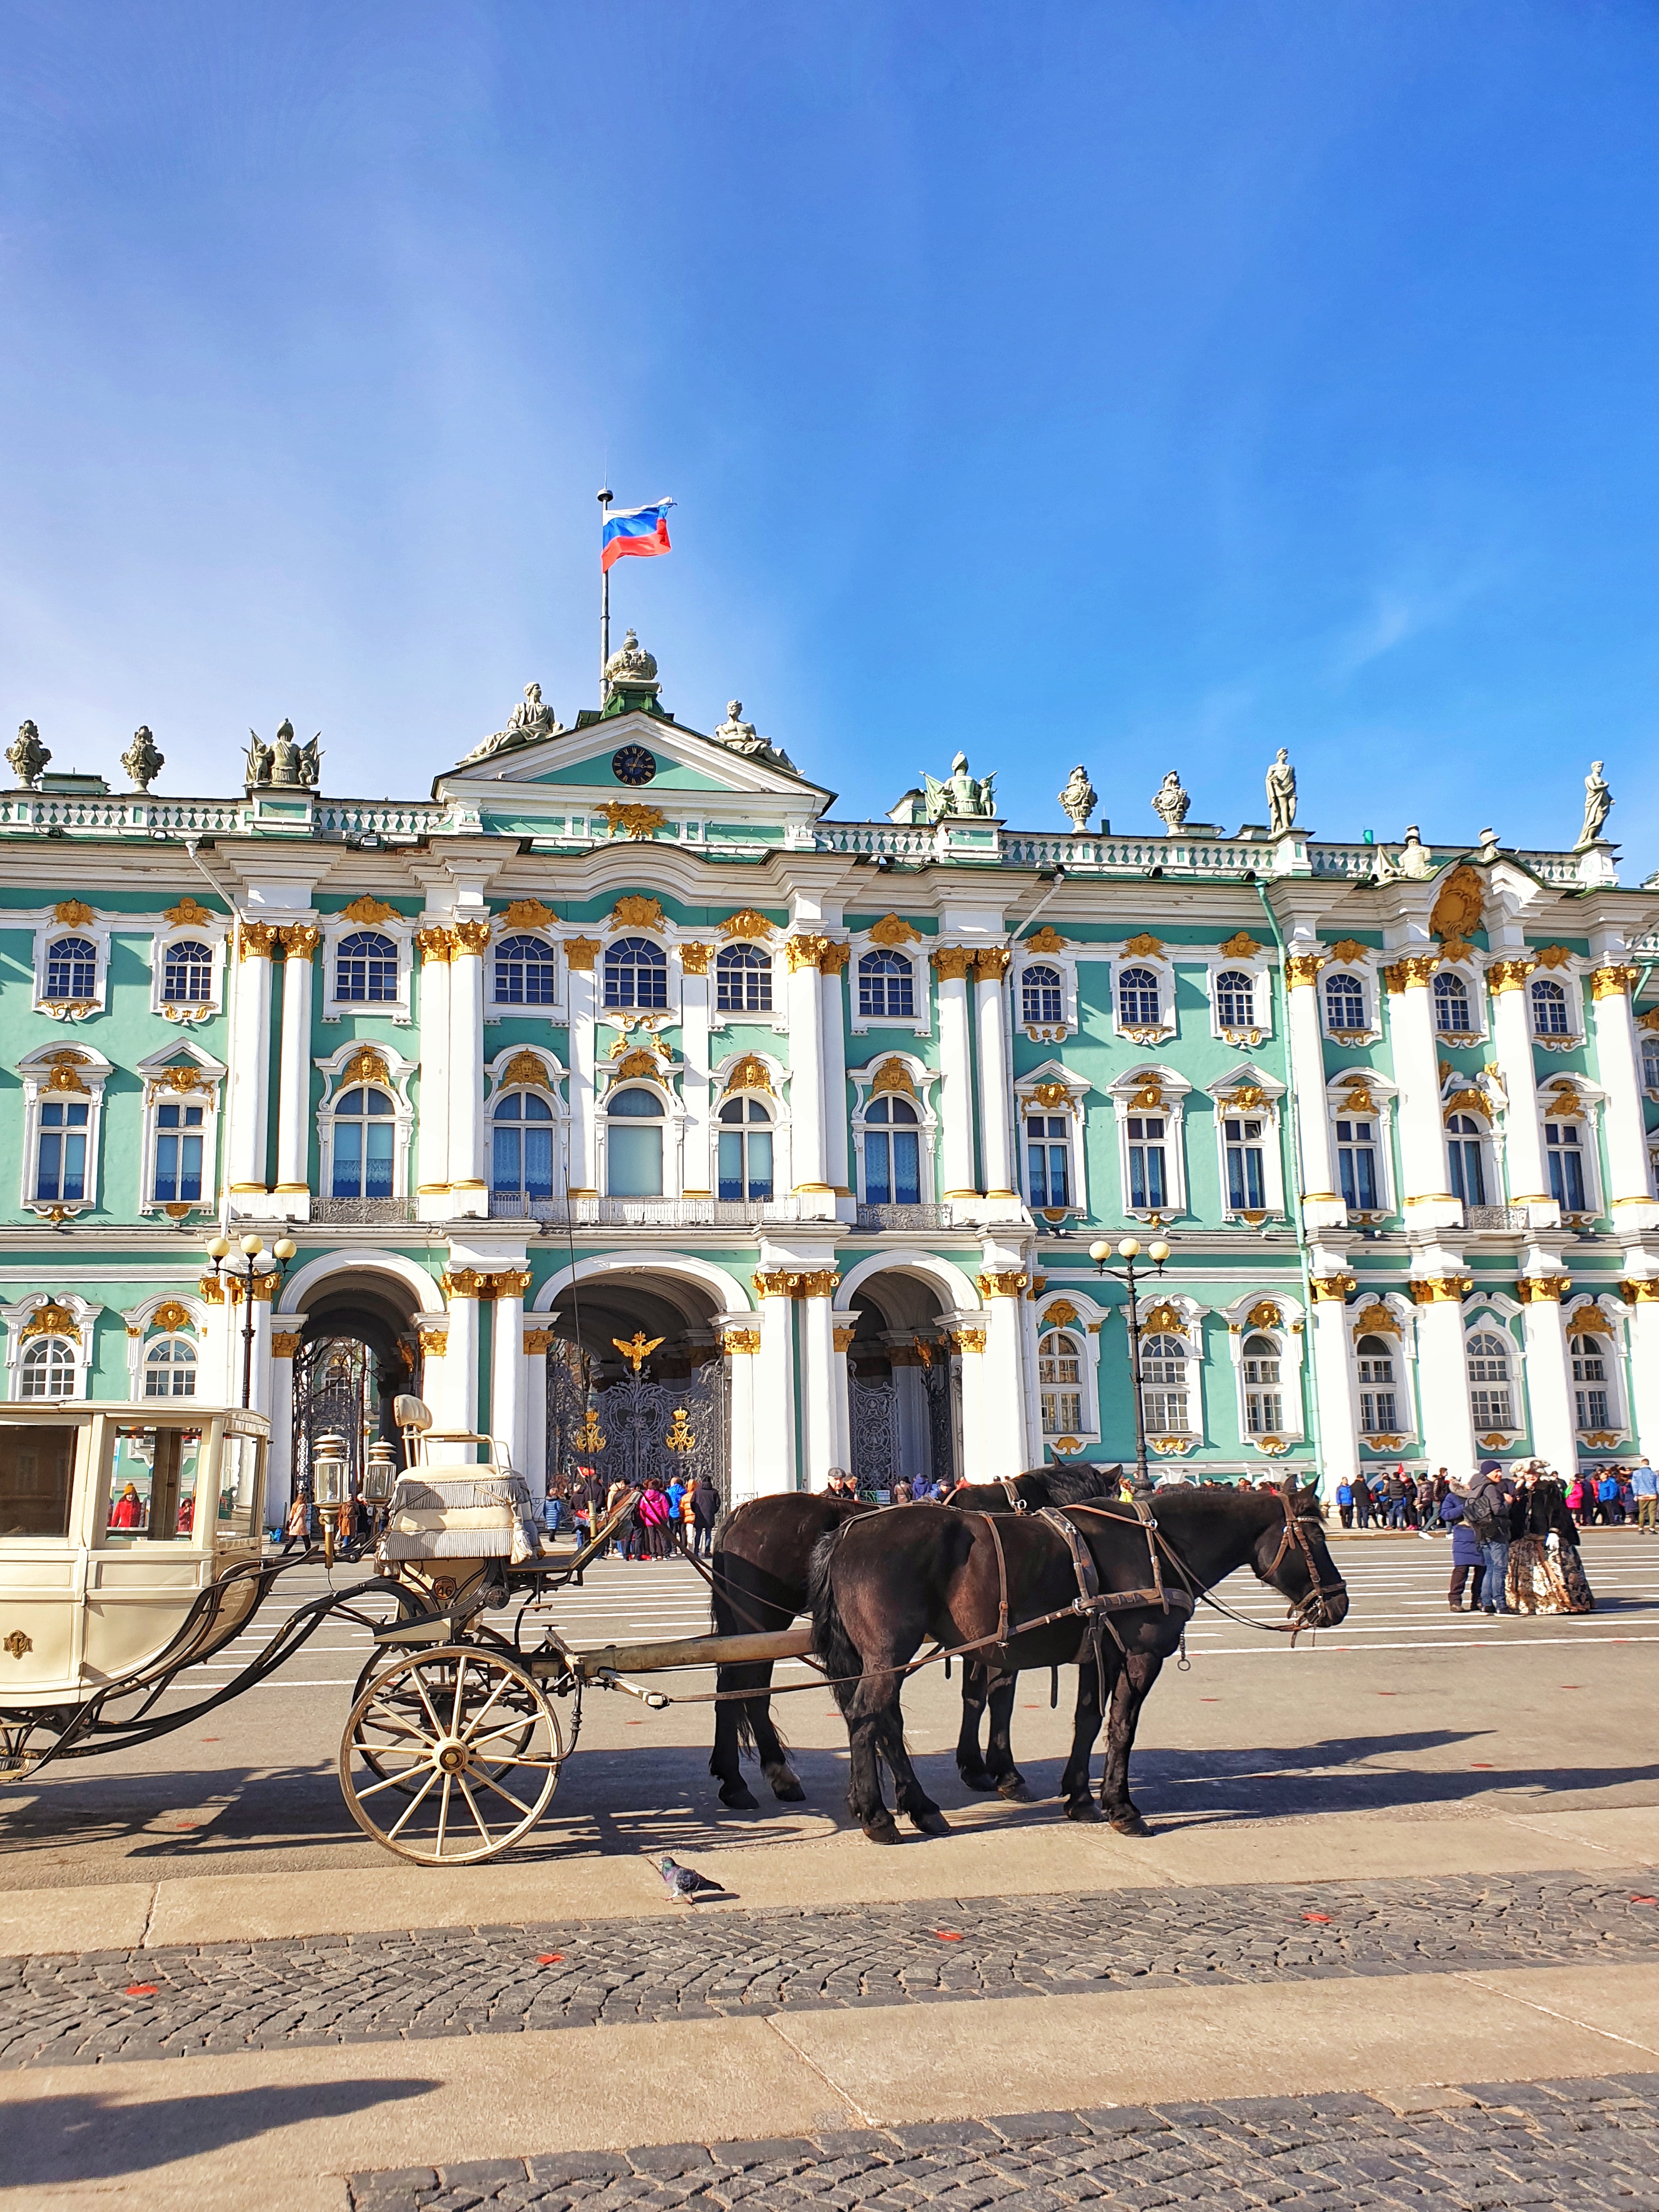 The winter palace in Saint Petersburg